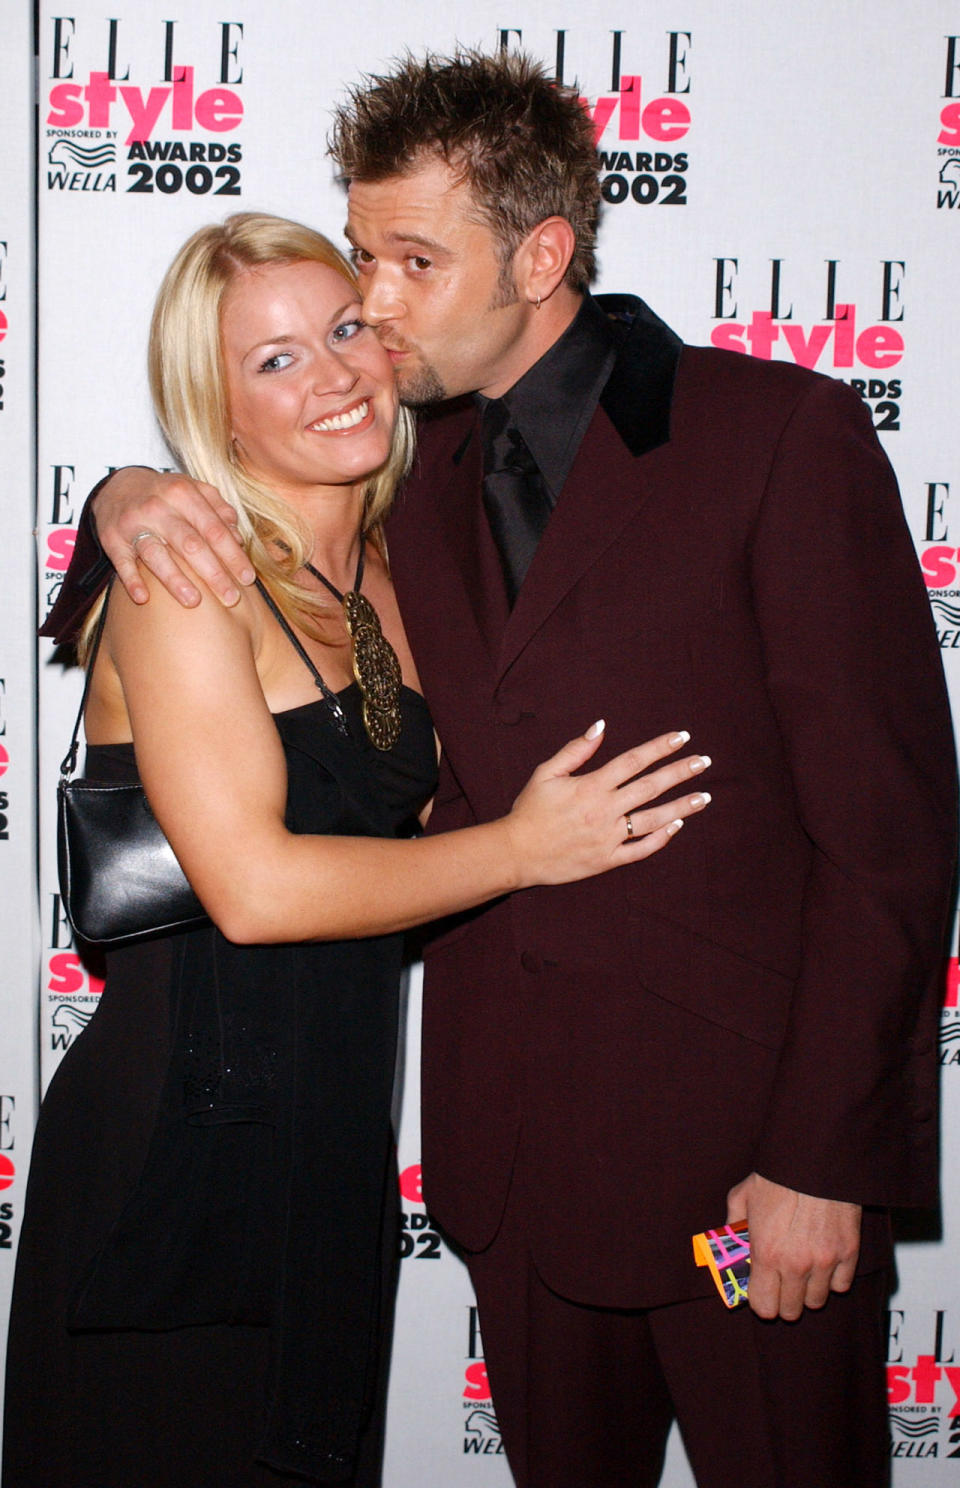 Darren Day and his girlfriend Adele at the Elle Style Awards at the Natural History Museum, London.